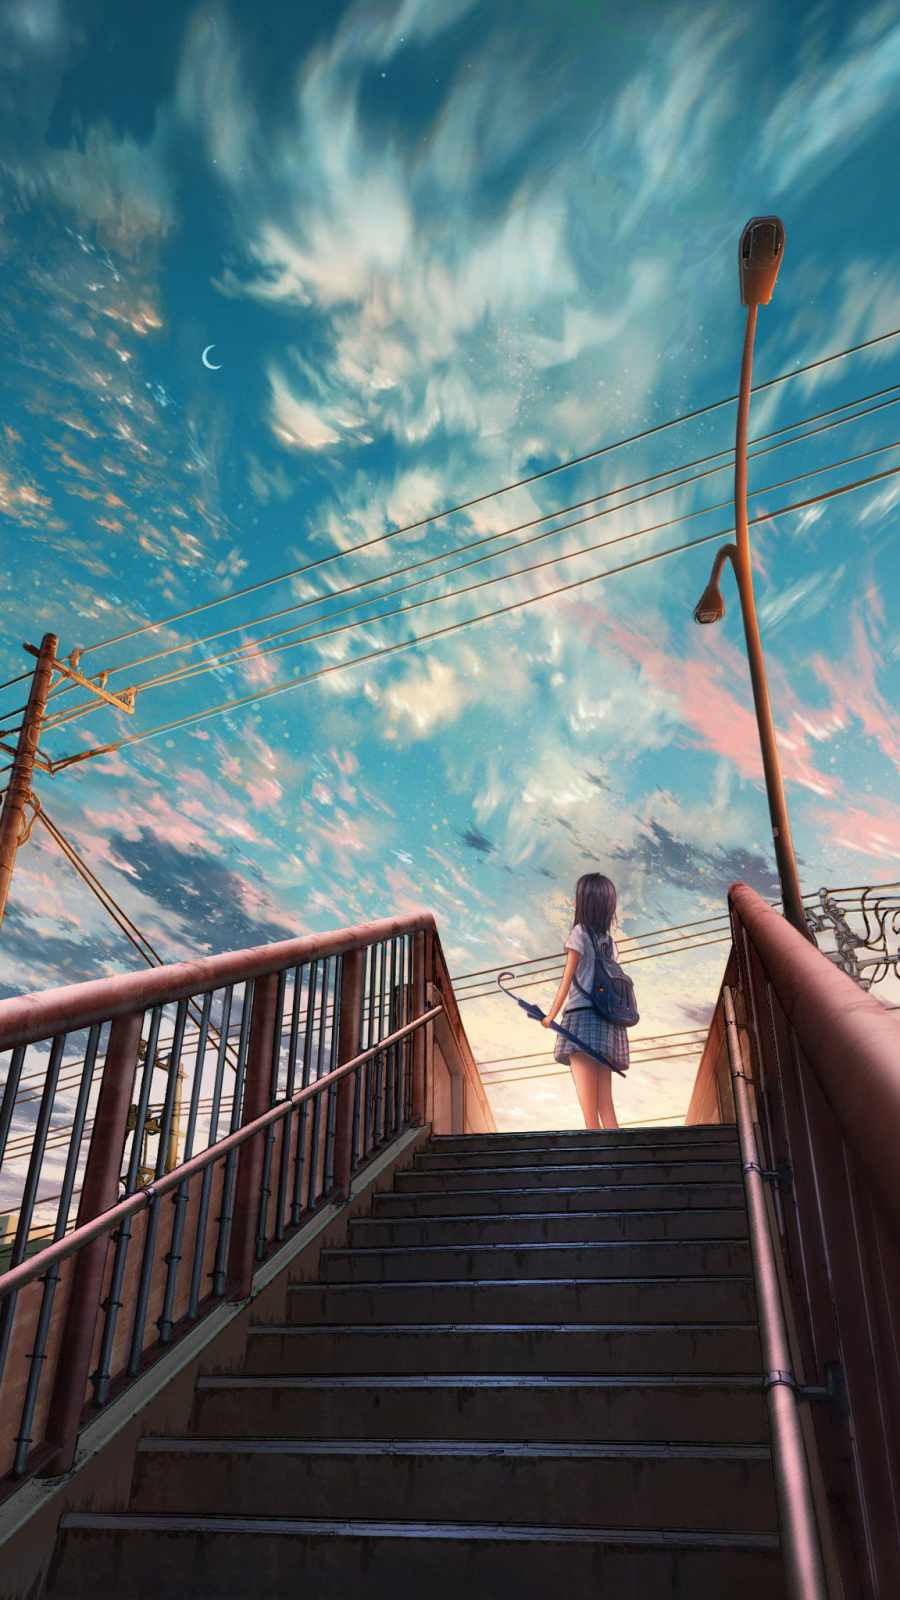 Anime Sky And Girl IPhone Wallpaper  IPhone Wallpapers